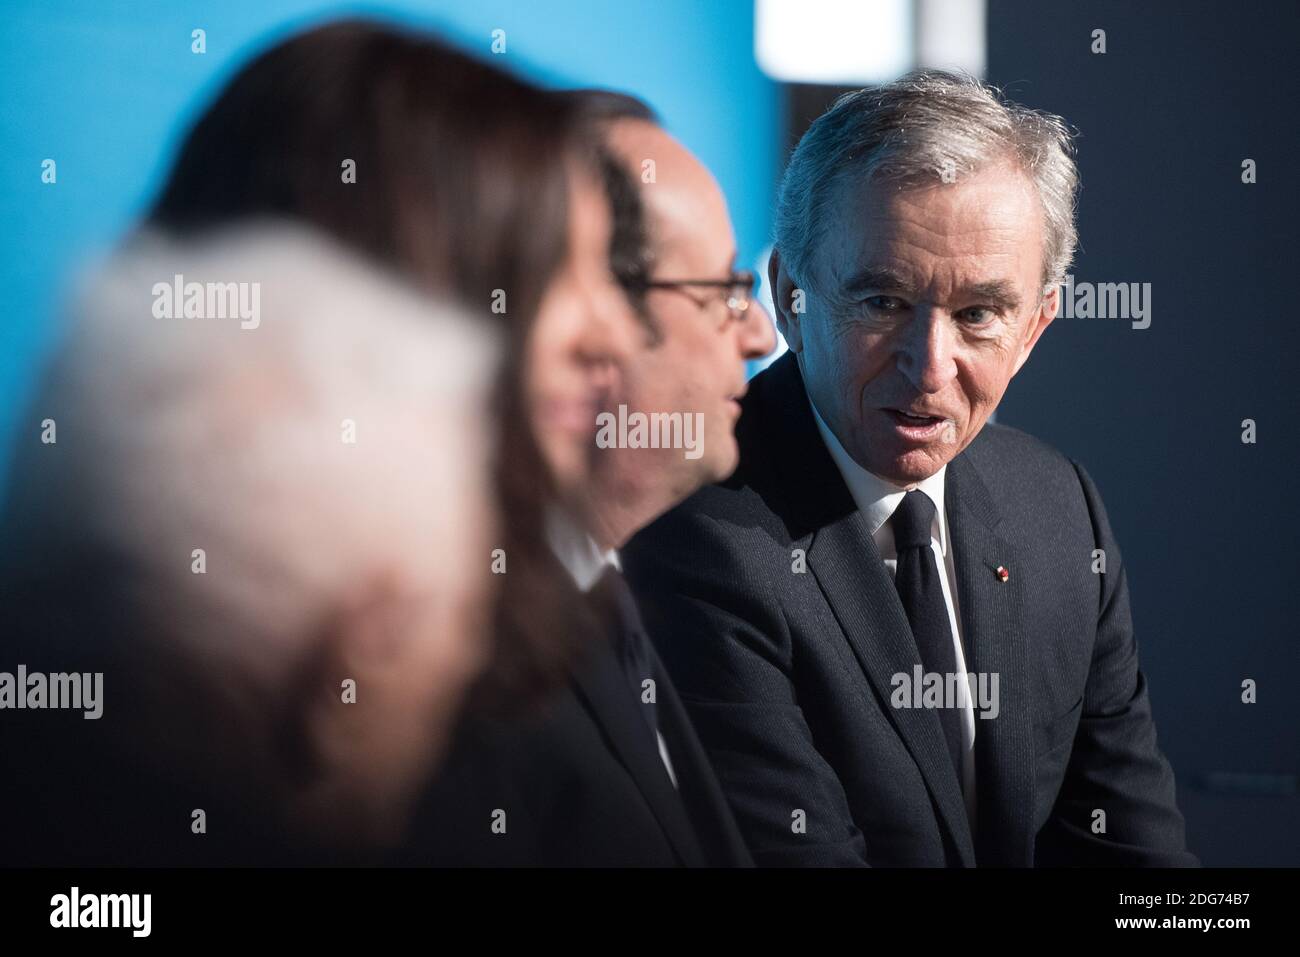 LVMH Group CEO Bernard Arnault attending the presentation of a major  cultural project for the city of Paris, at Jardin d'Acclimatation amusement  park in Paris, France on March 8, 2017. LVMW Group